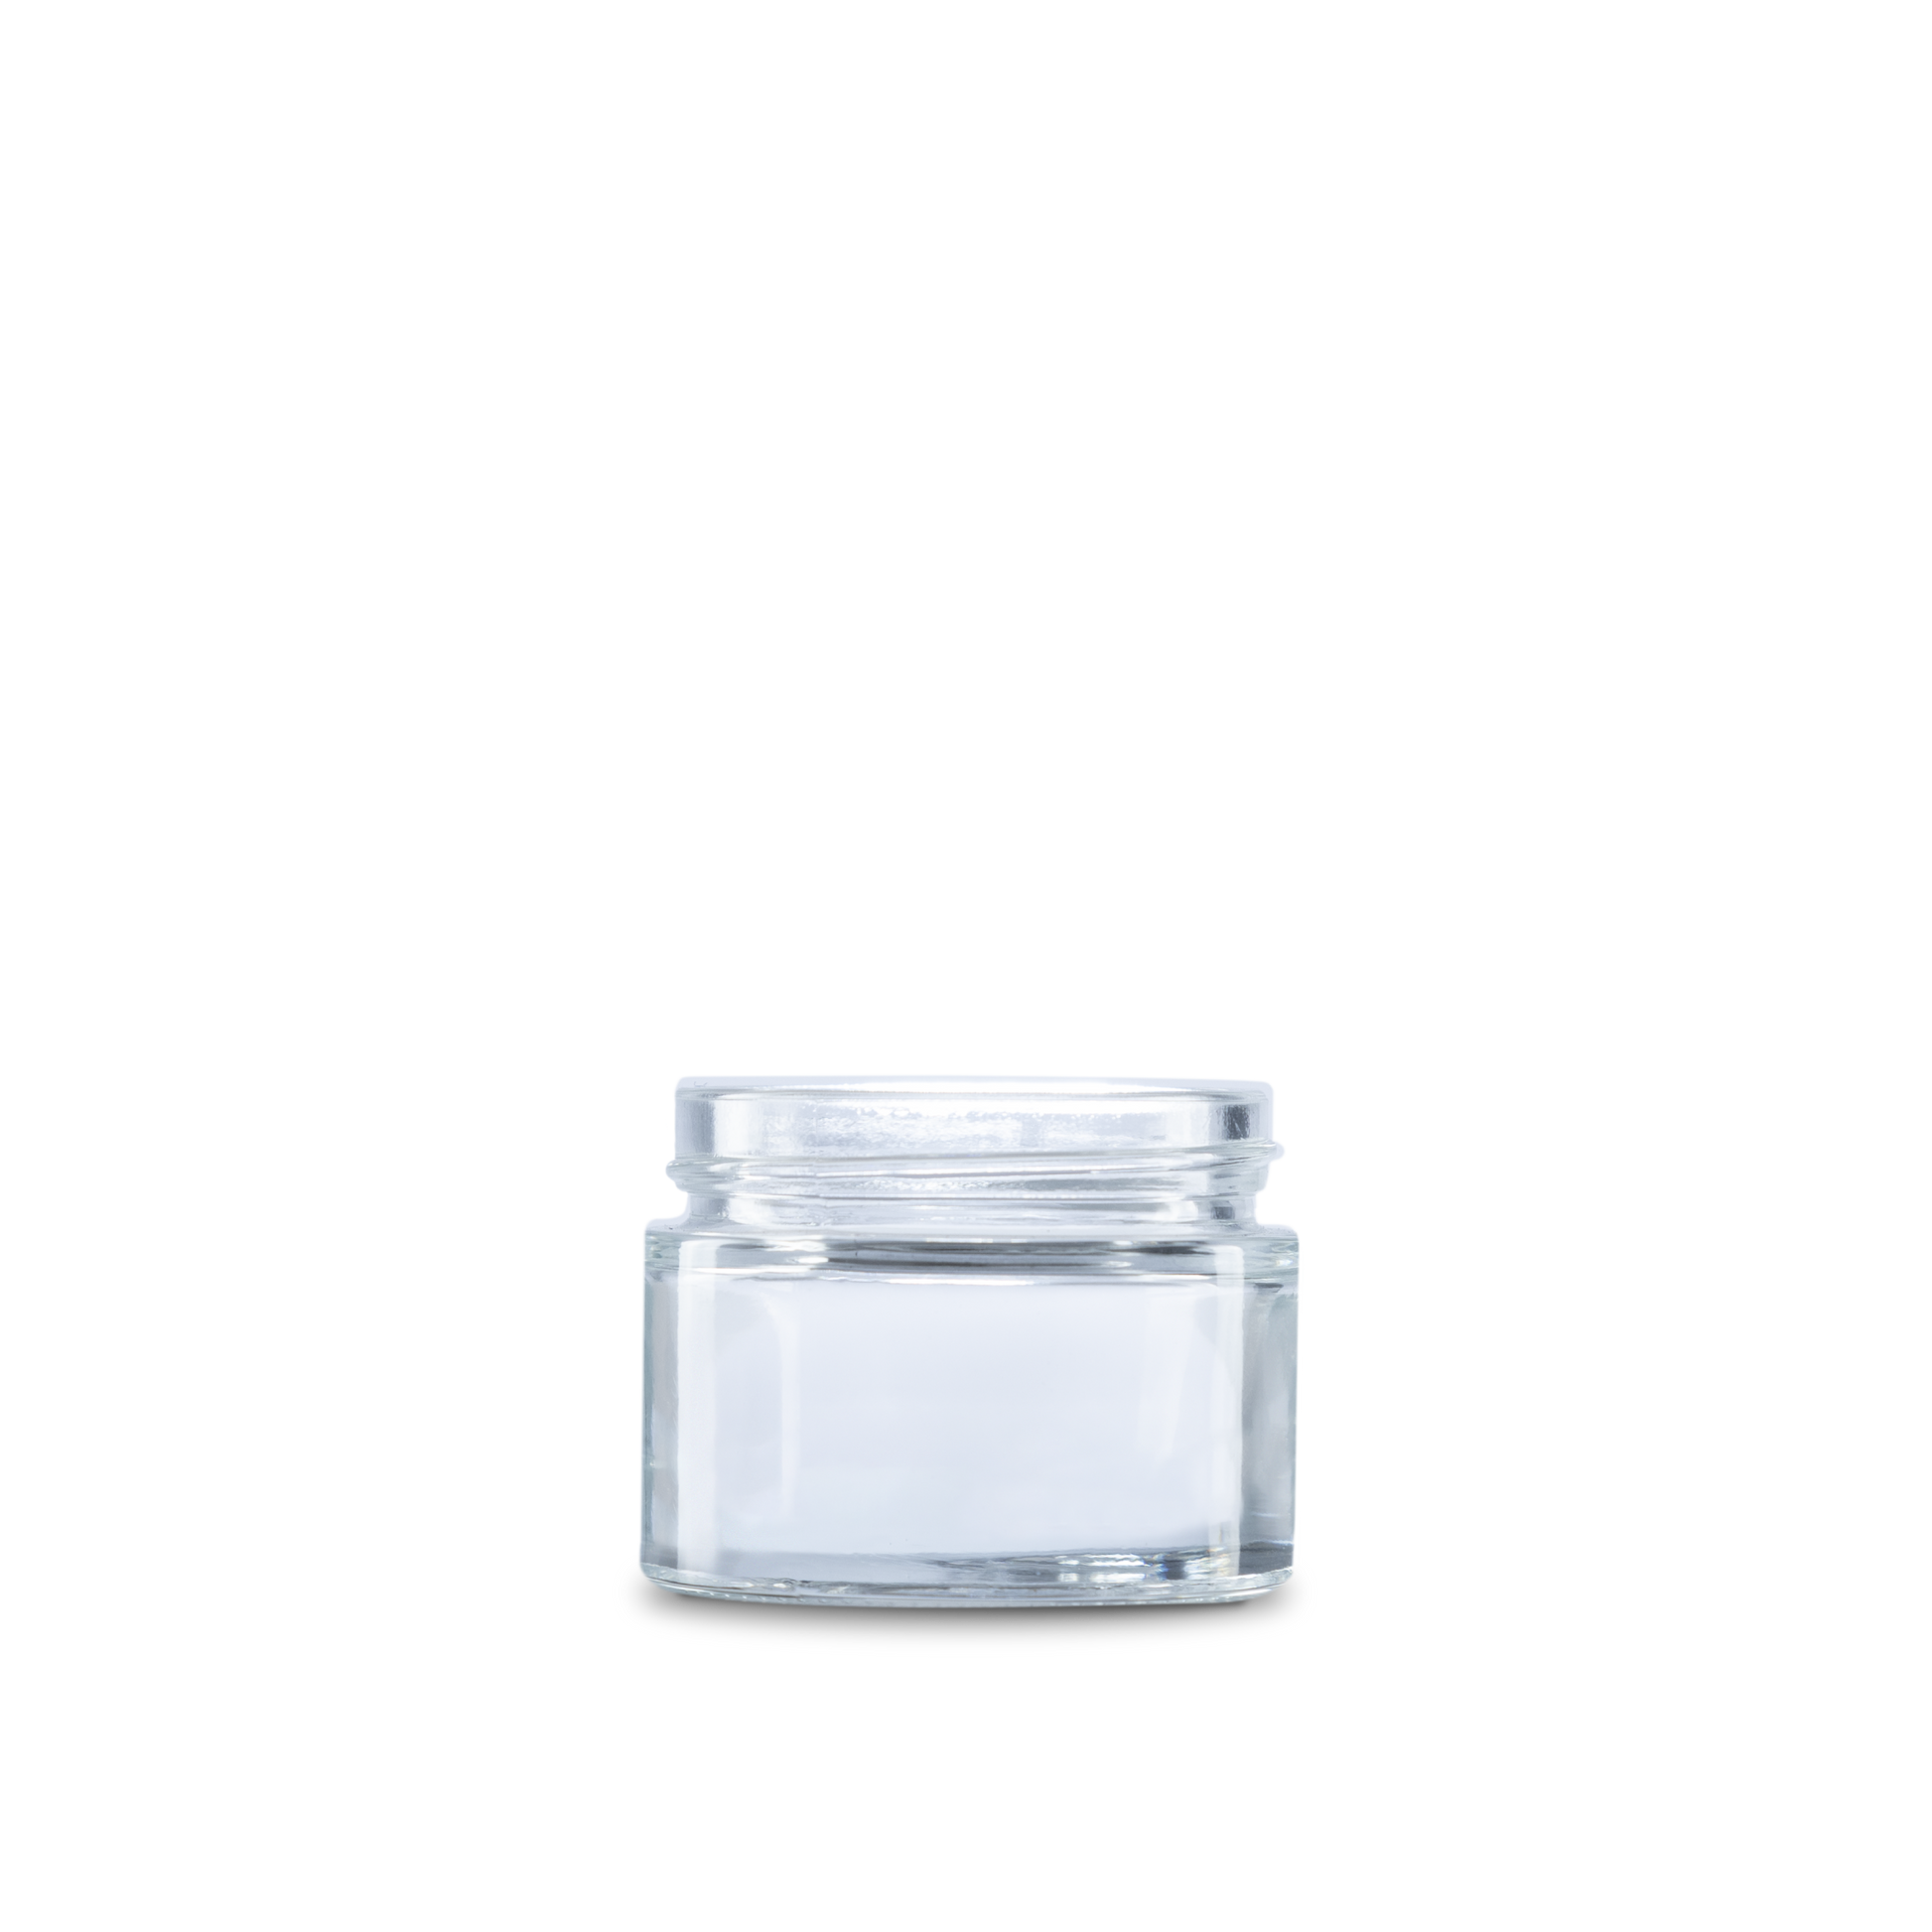 2 oz clear straight sided glass jars design and clear glass construction allow you to see the product inside. 